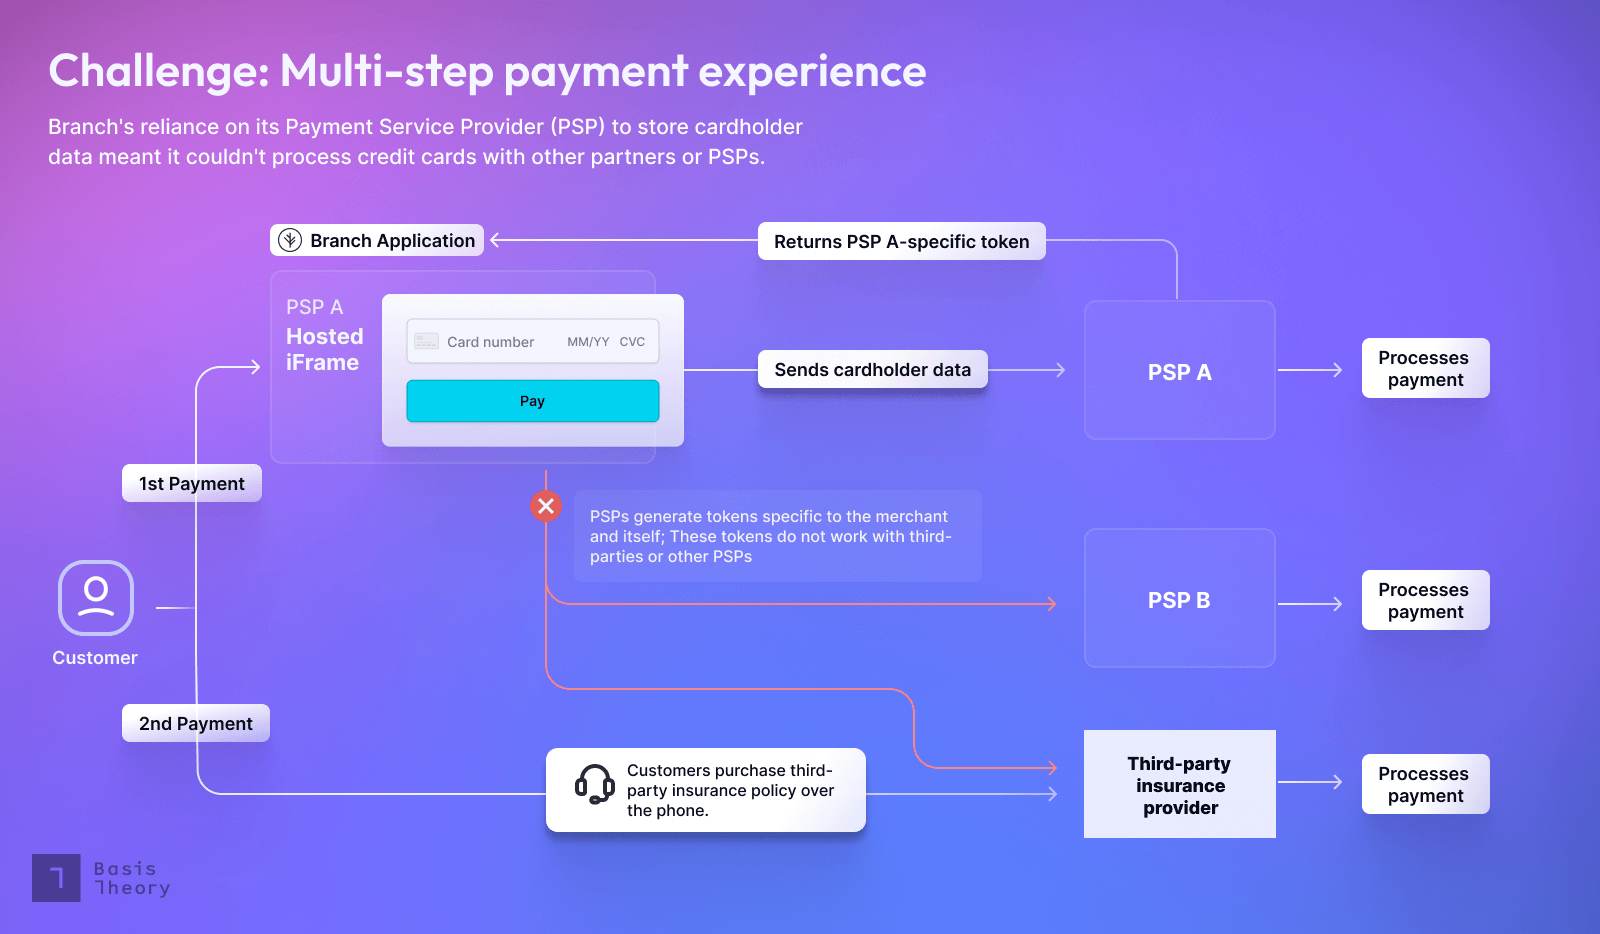 Visual flow showing how PSPs locked Branch into a multi-step payment experience for its customers